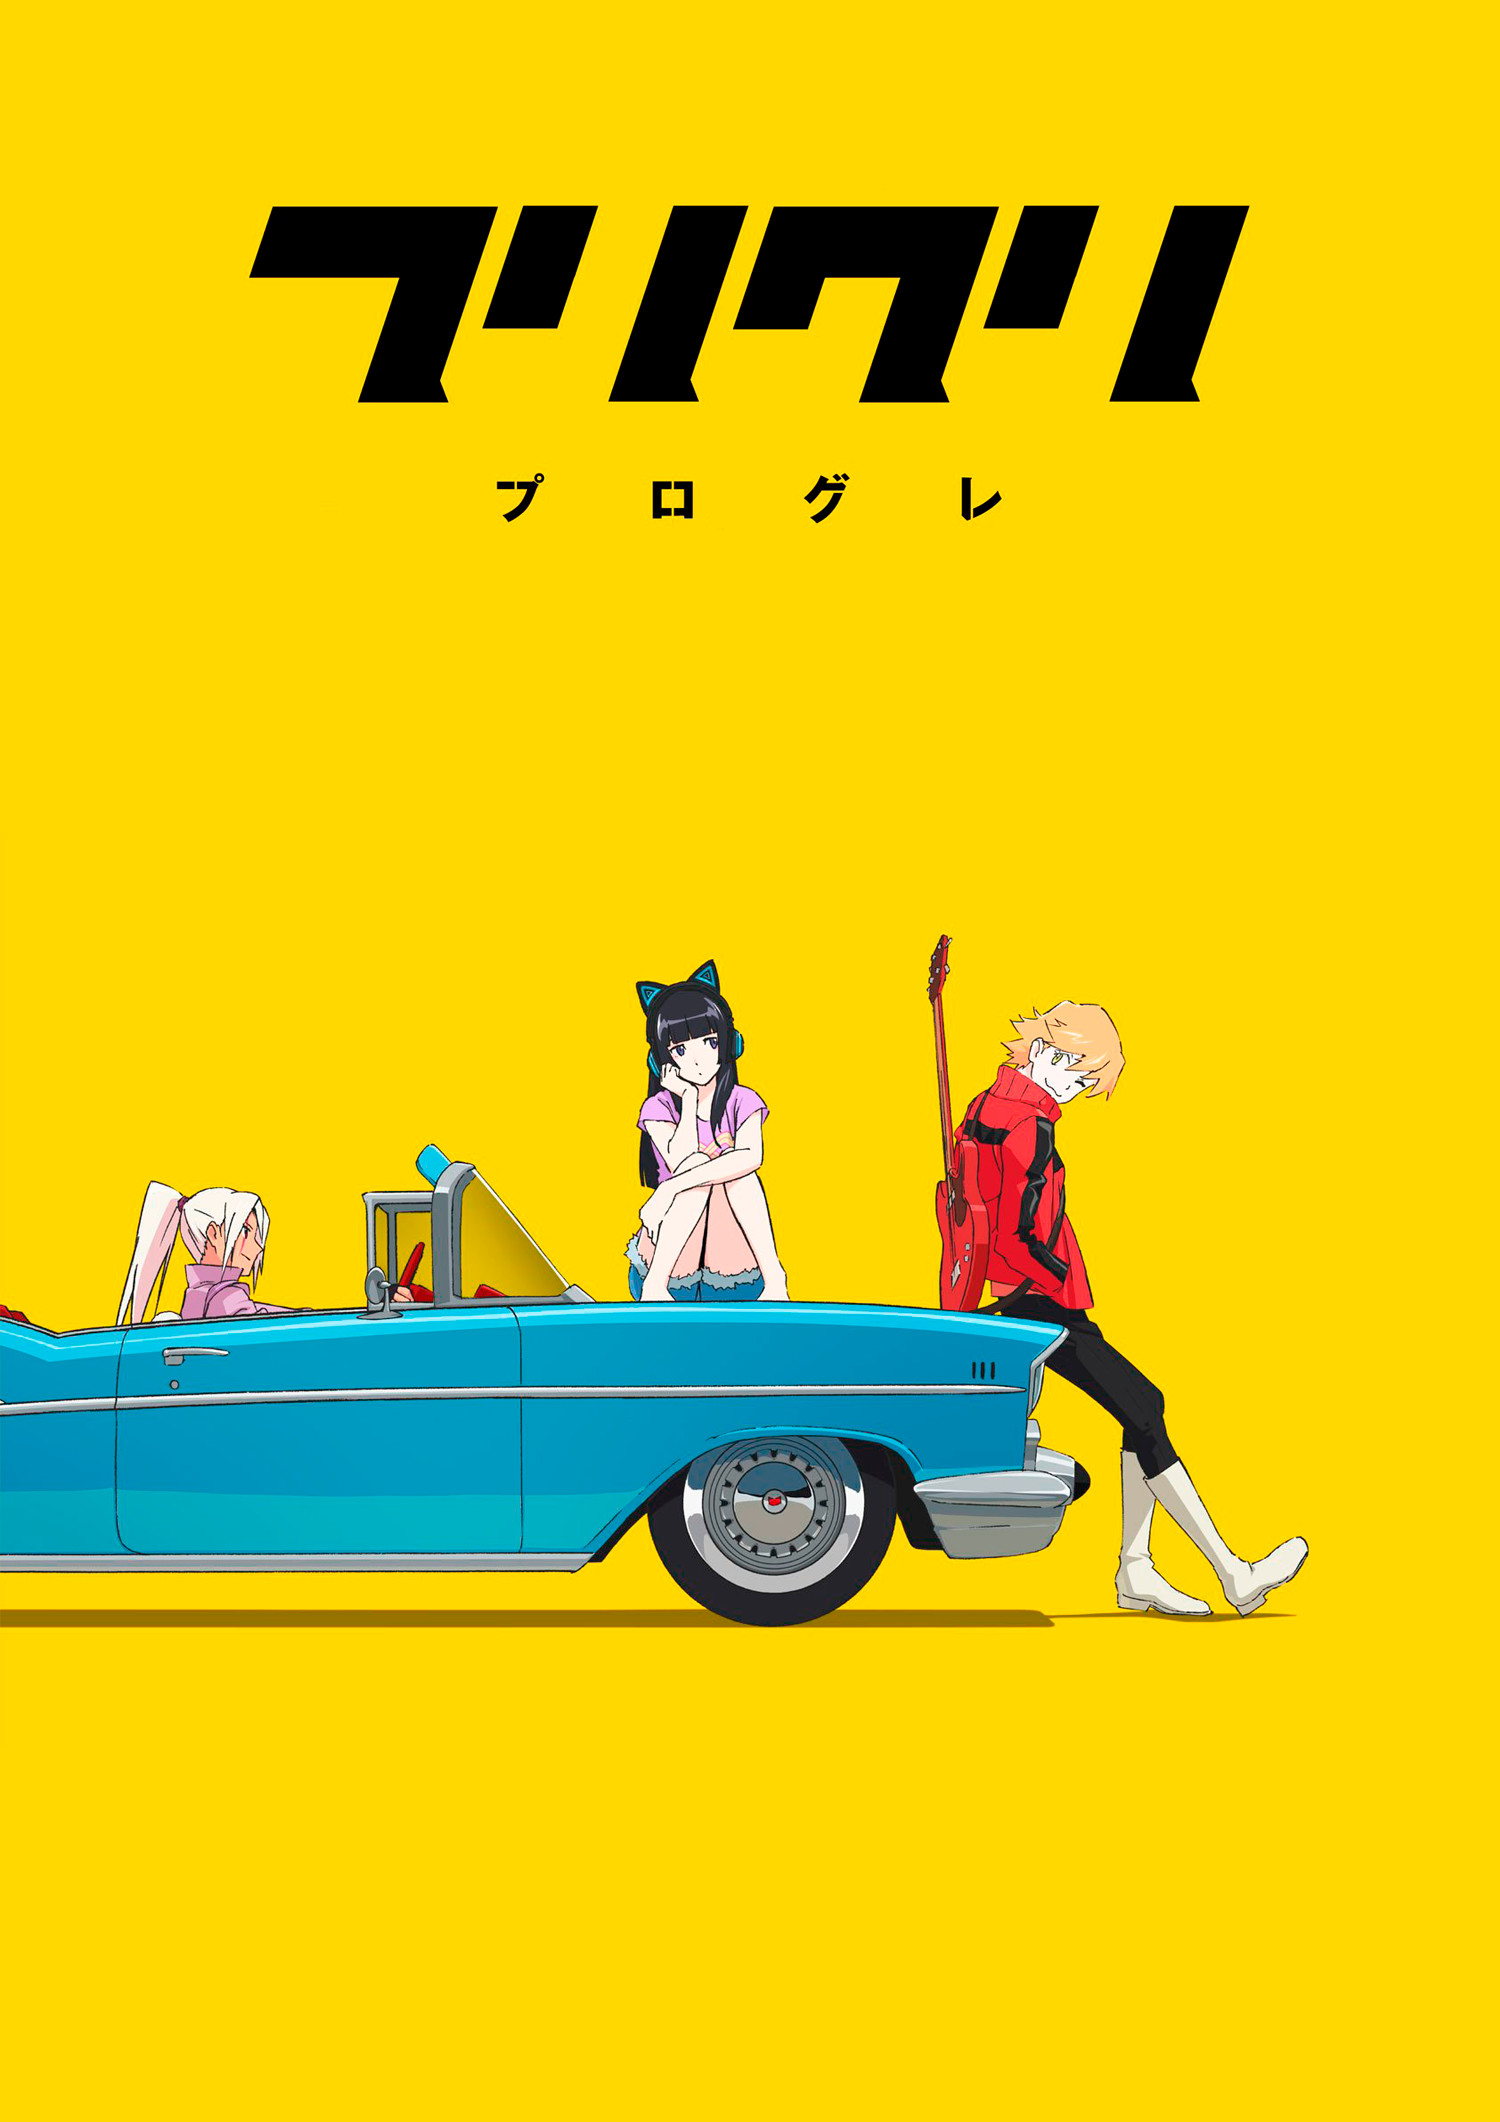 1500x2122 Source: http://www.theouthousers.com/forum/the-asylum/new-flcl -sequels-trailer-and-release-months-updated-t120794.html